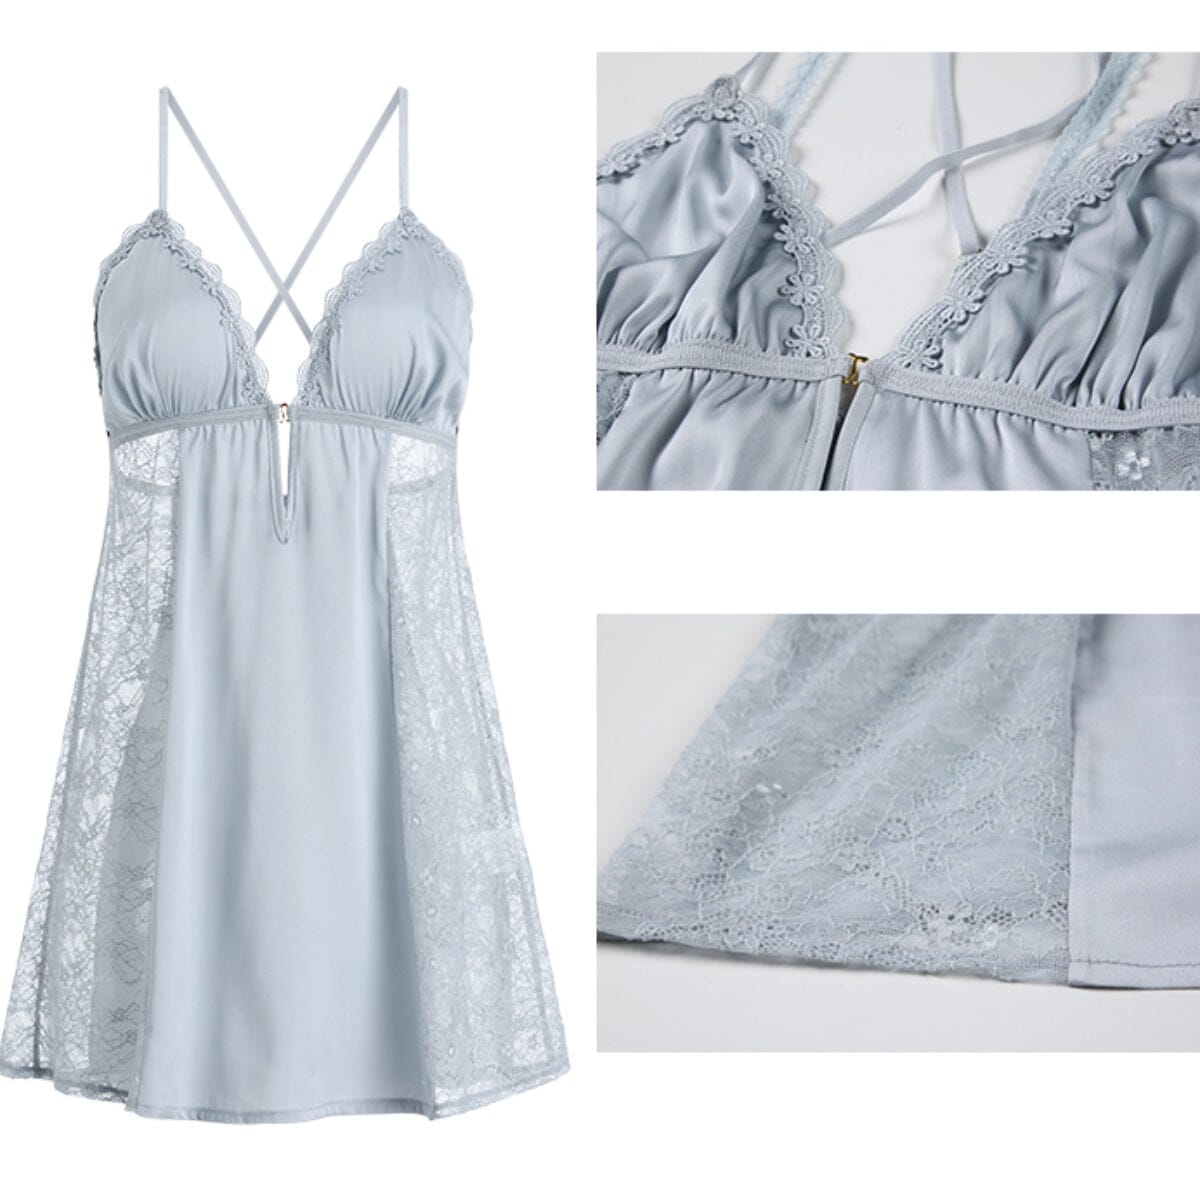 Gail lace and satin slip Intimates LOVEFREYA S Ice blue 